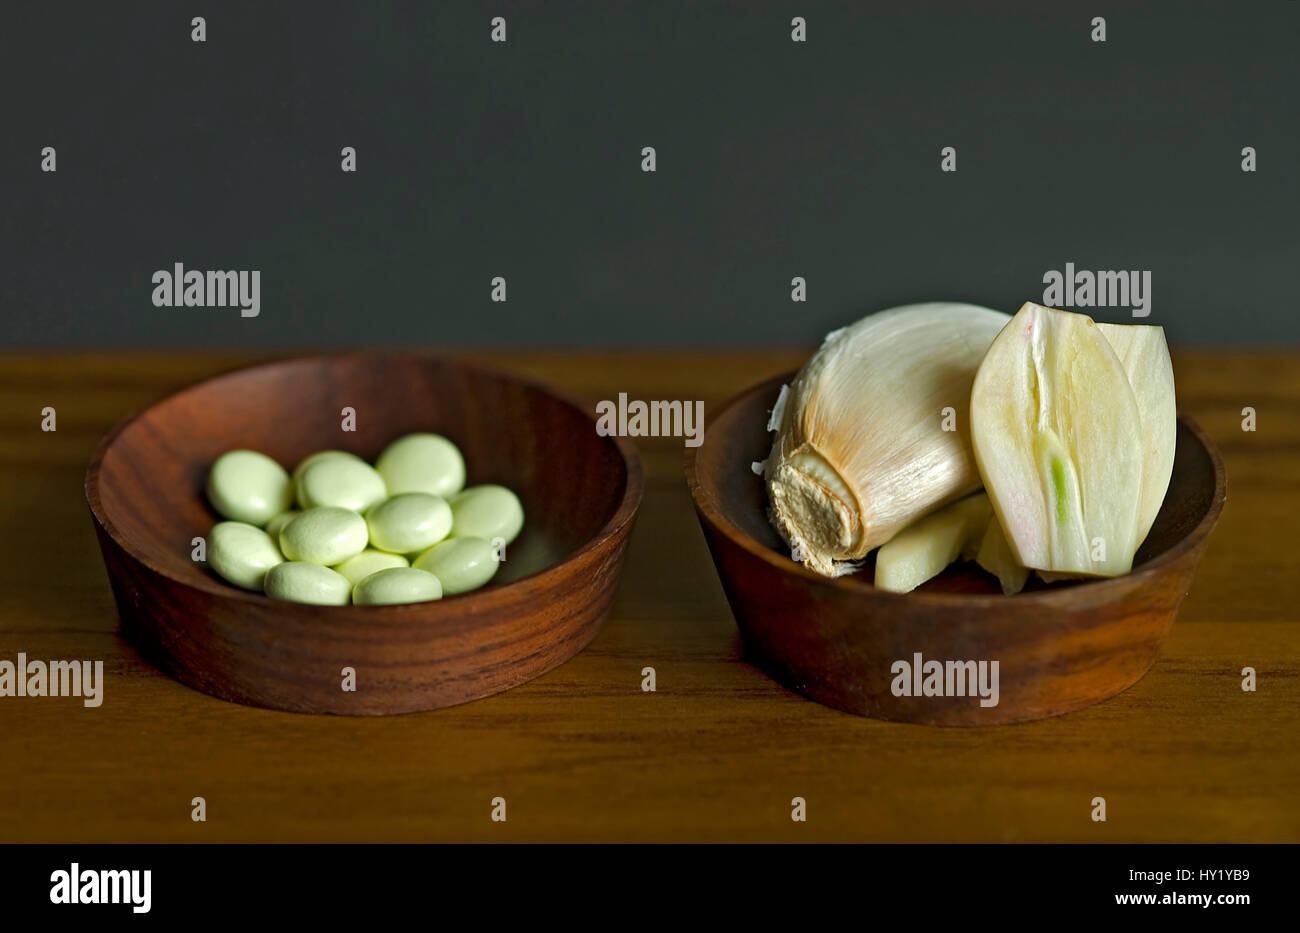 This stock photo shows a close up of Garlic pills and fresh cut Garlic bulbs in small wooden bowls. This image is meant to symbolize the choice betwee Stock Photo